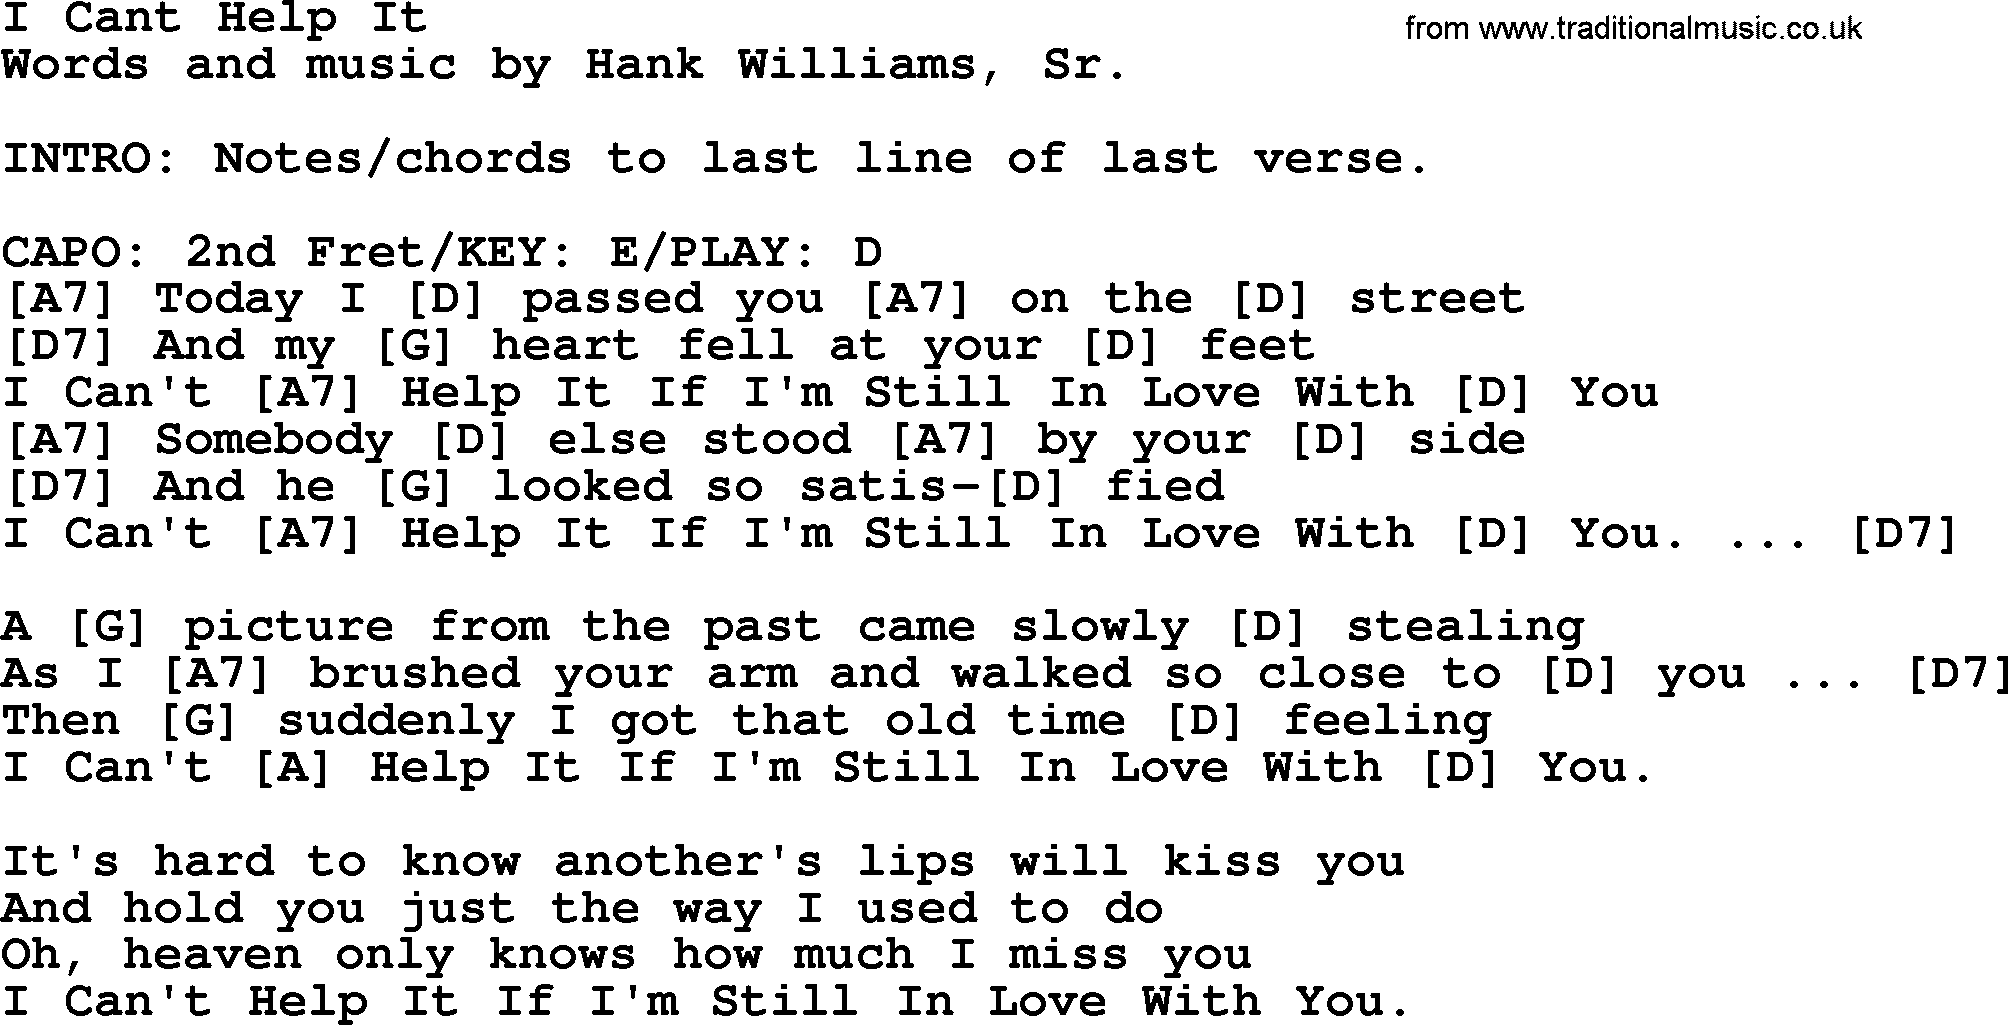 Hank Williams song I Cant Help It, lyrics and chords